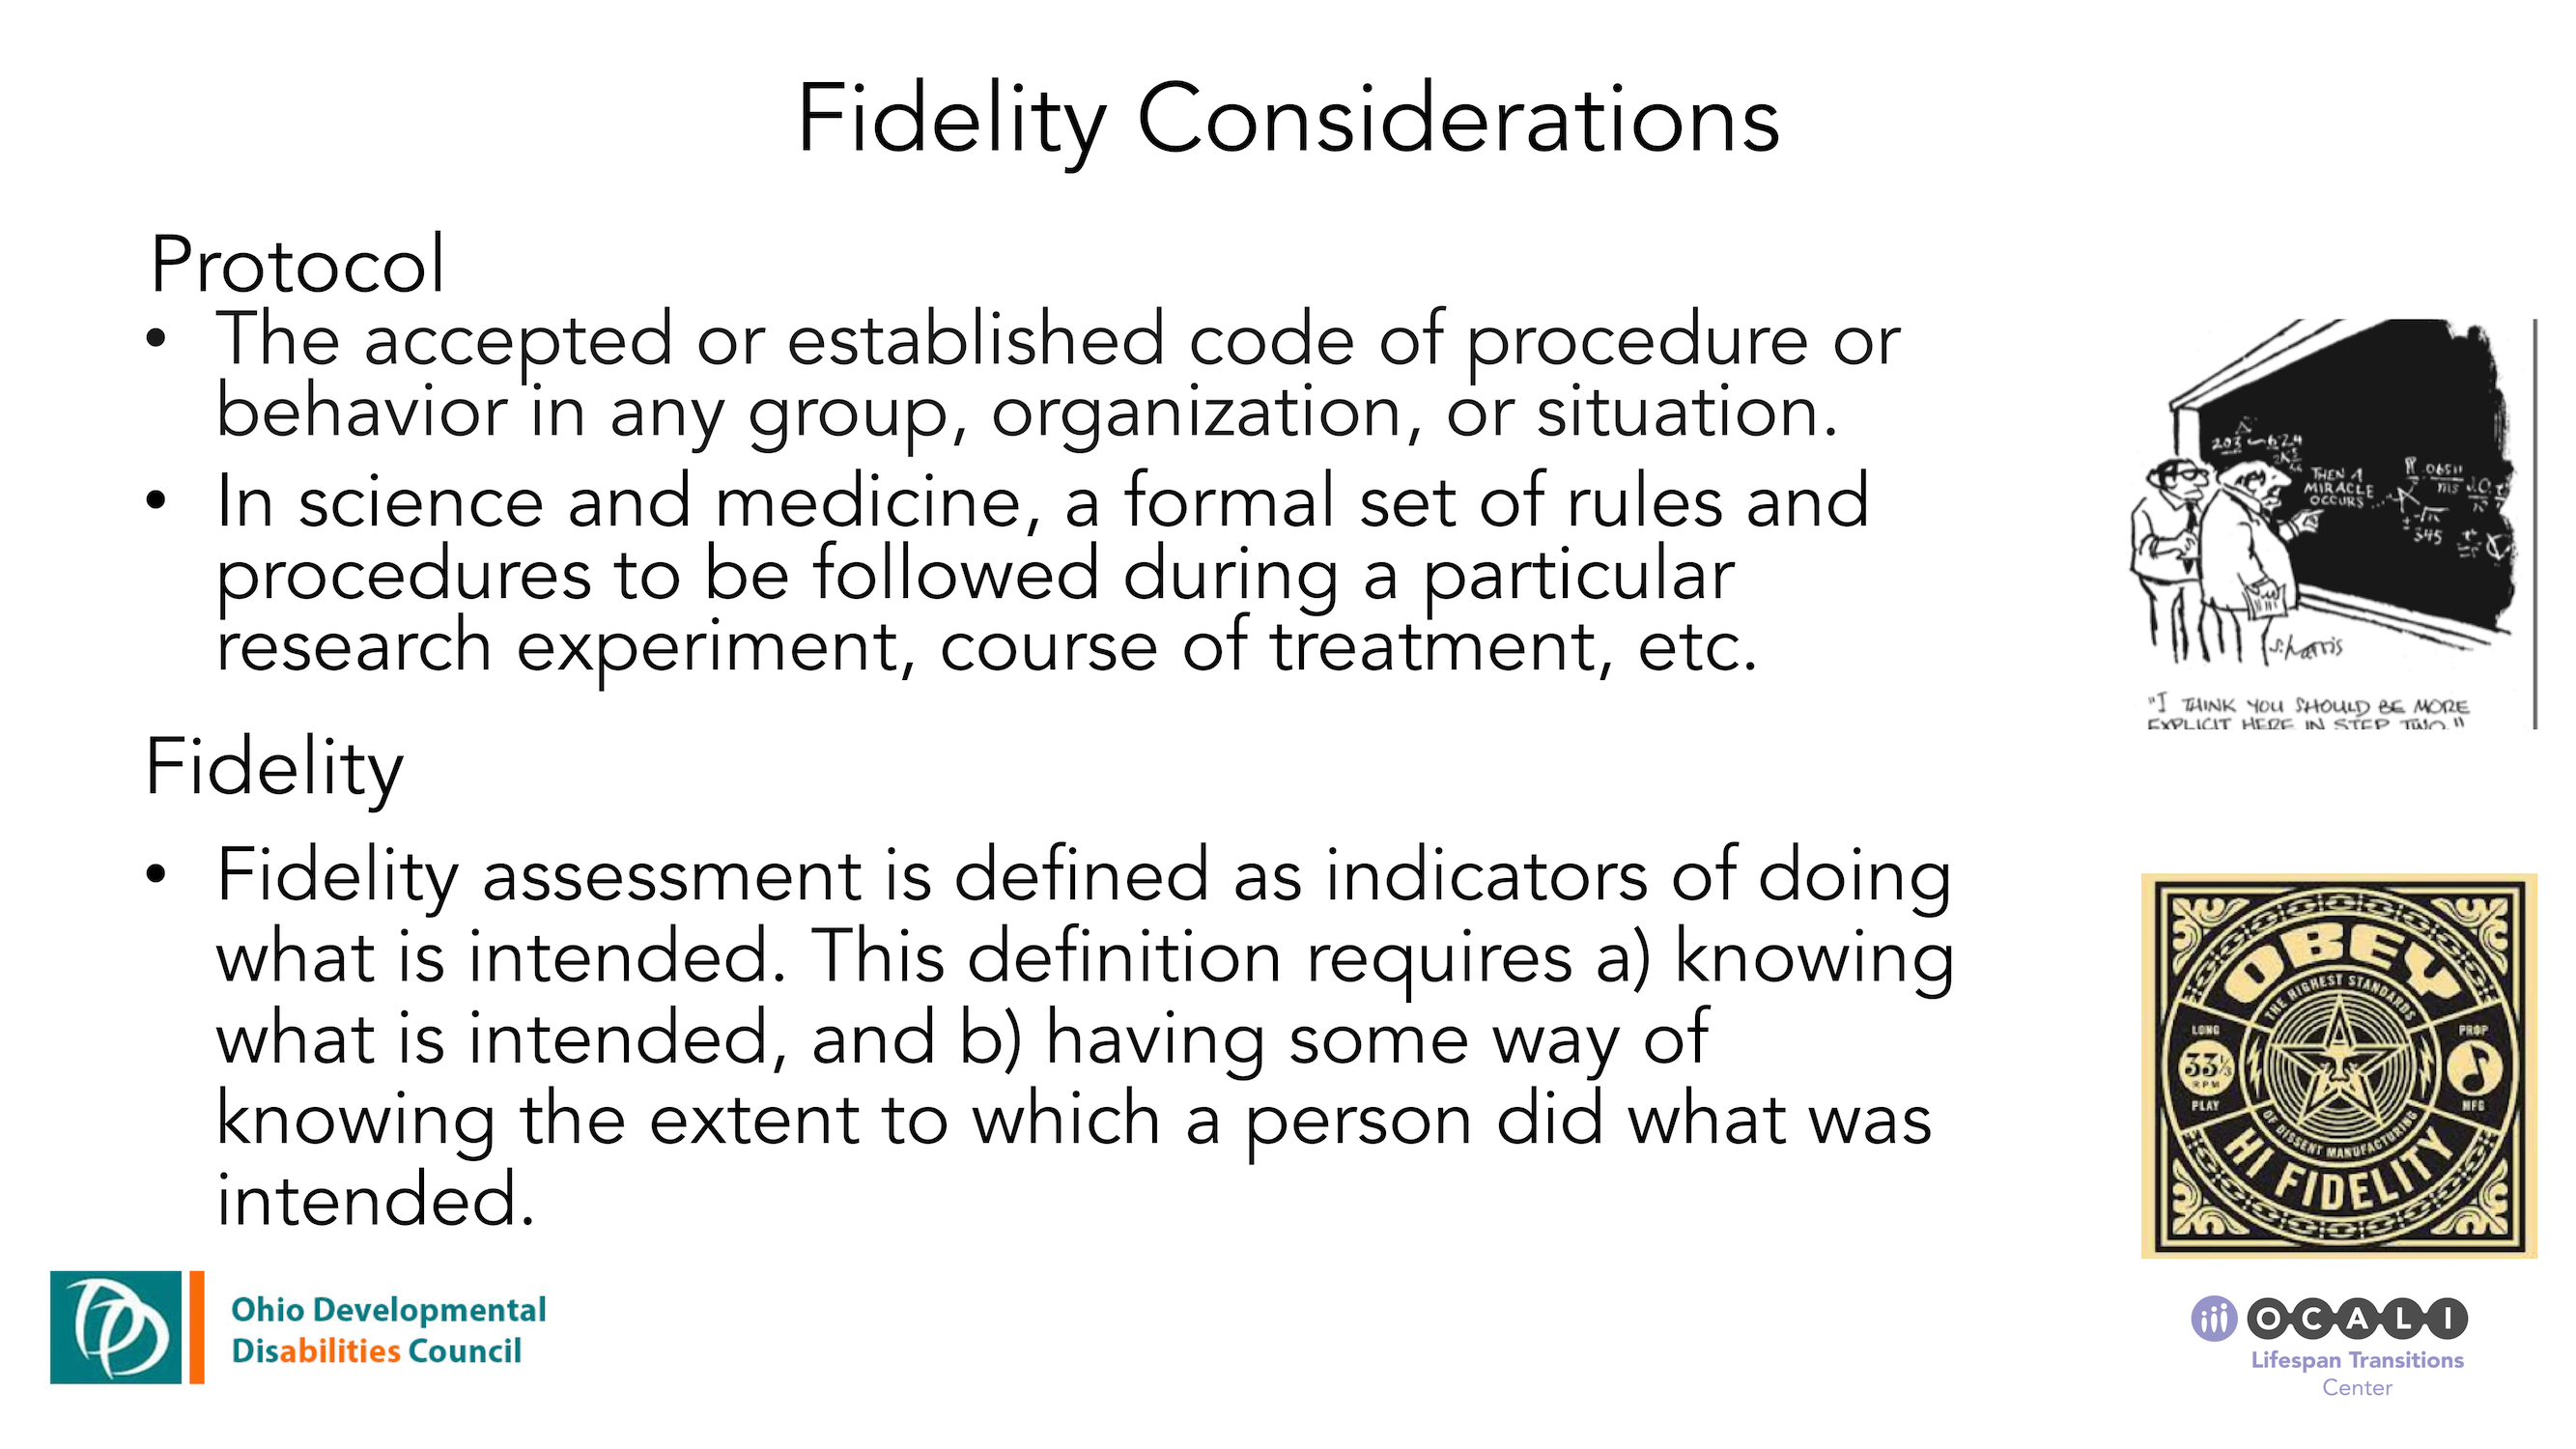 S2 Slide Four Preview: Fidelity Considerations